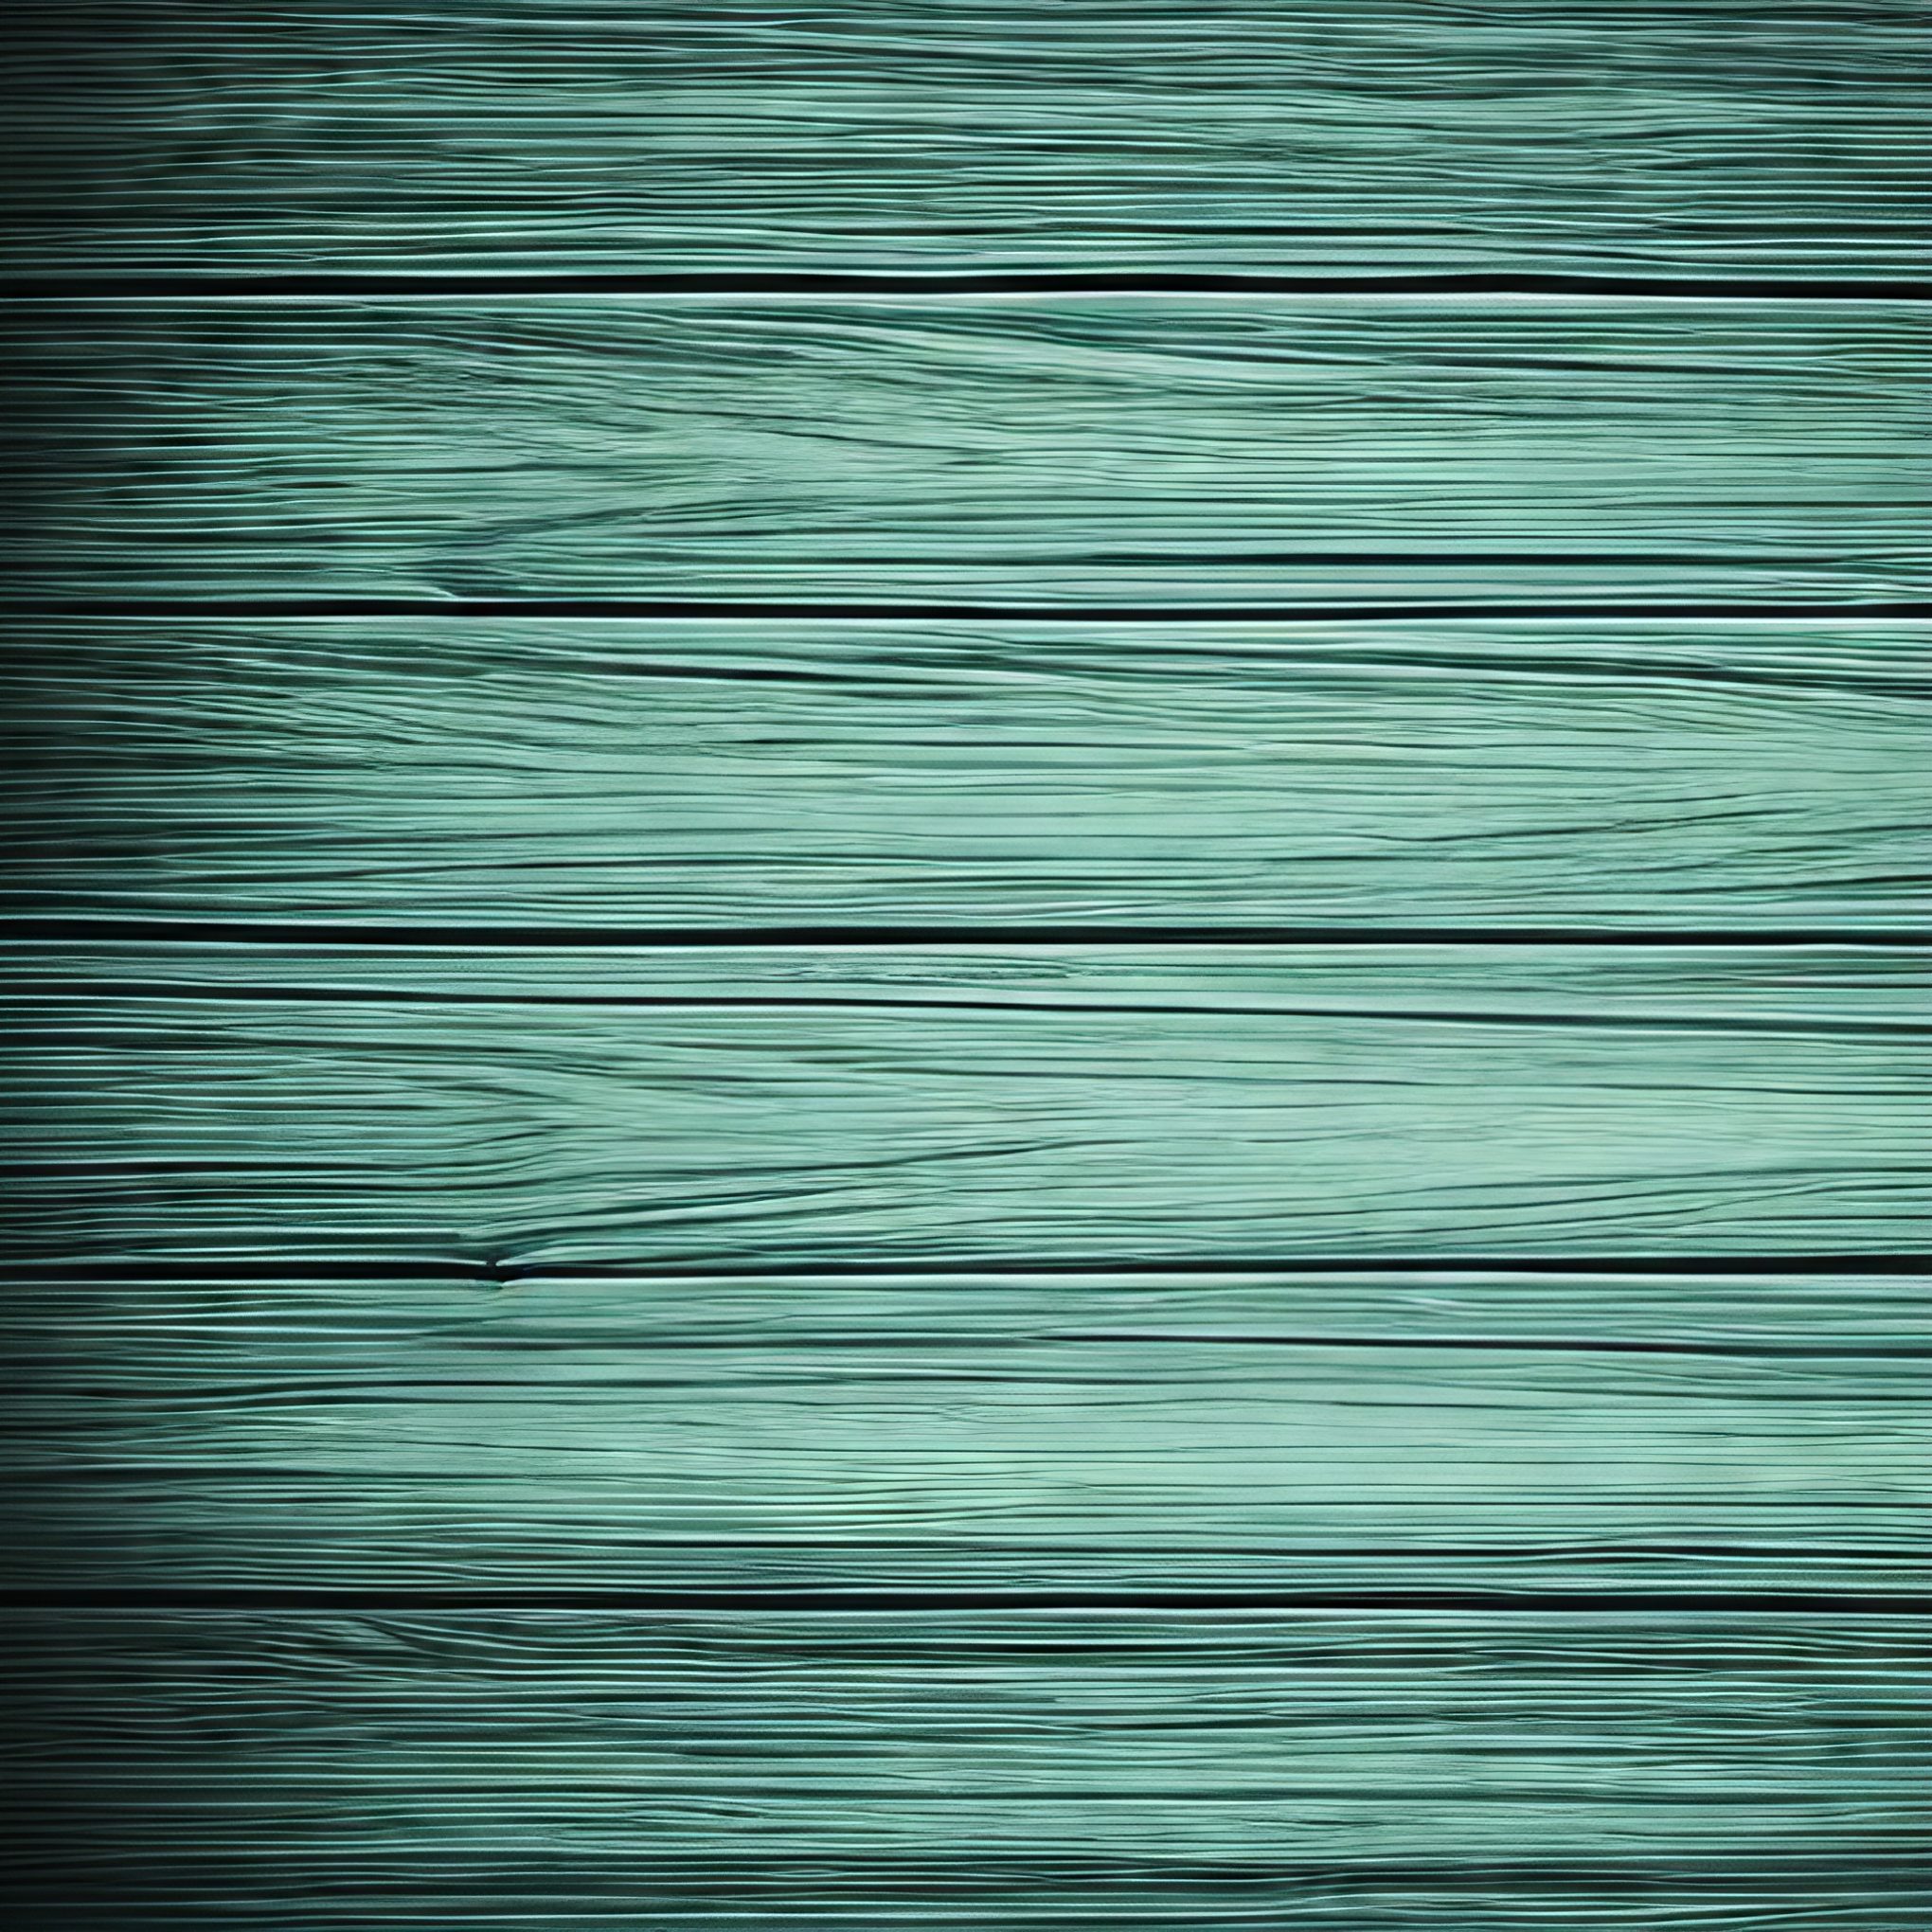 Teal Wooden Painted Plank Floorboards Free Stock Photo